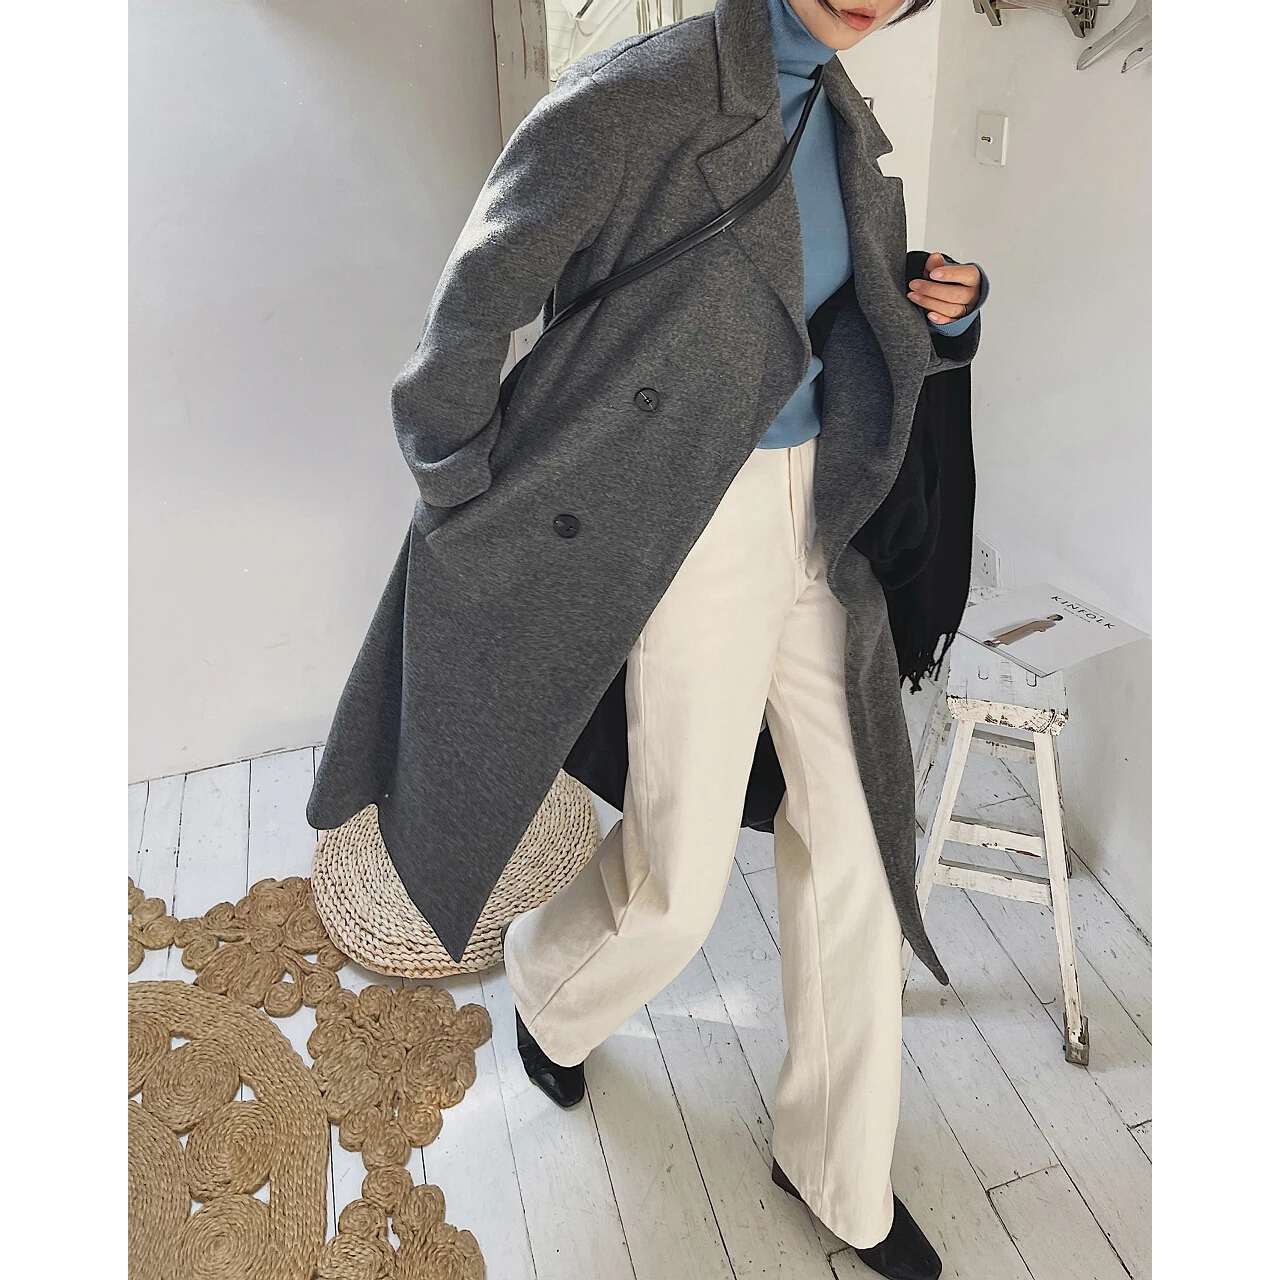 2022 Grey Long Oversize Woman Coat Spring Winter Jacket Clothes Trench Cardigan Outerwear Overcoat Oversize wool and mixtures